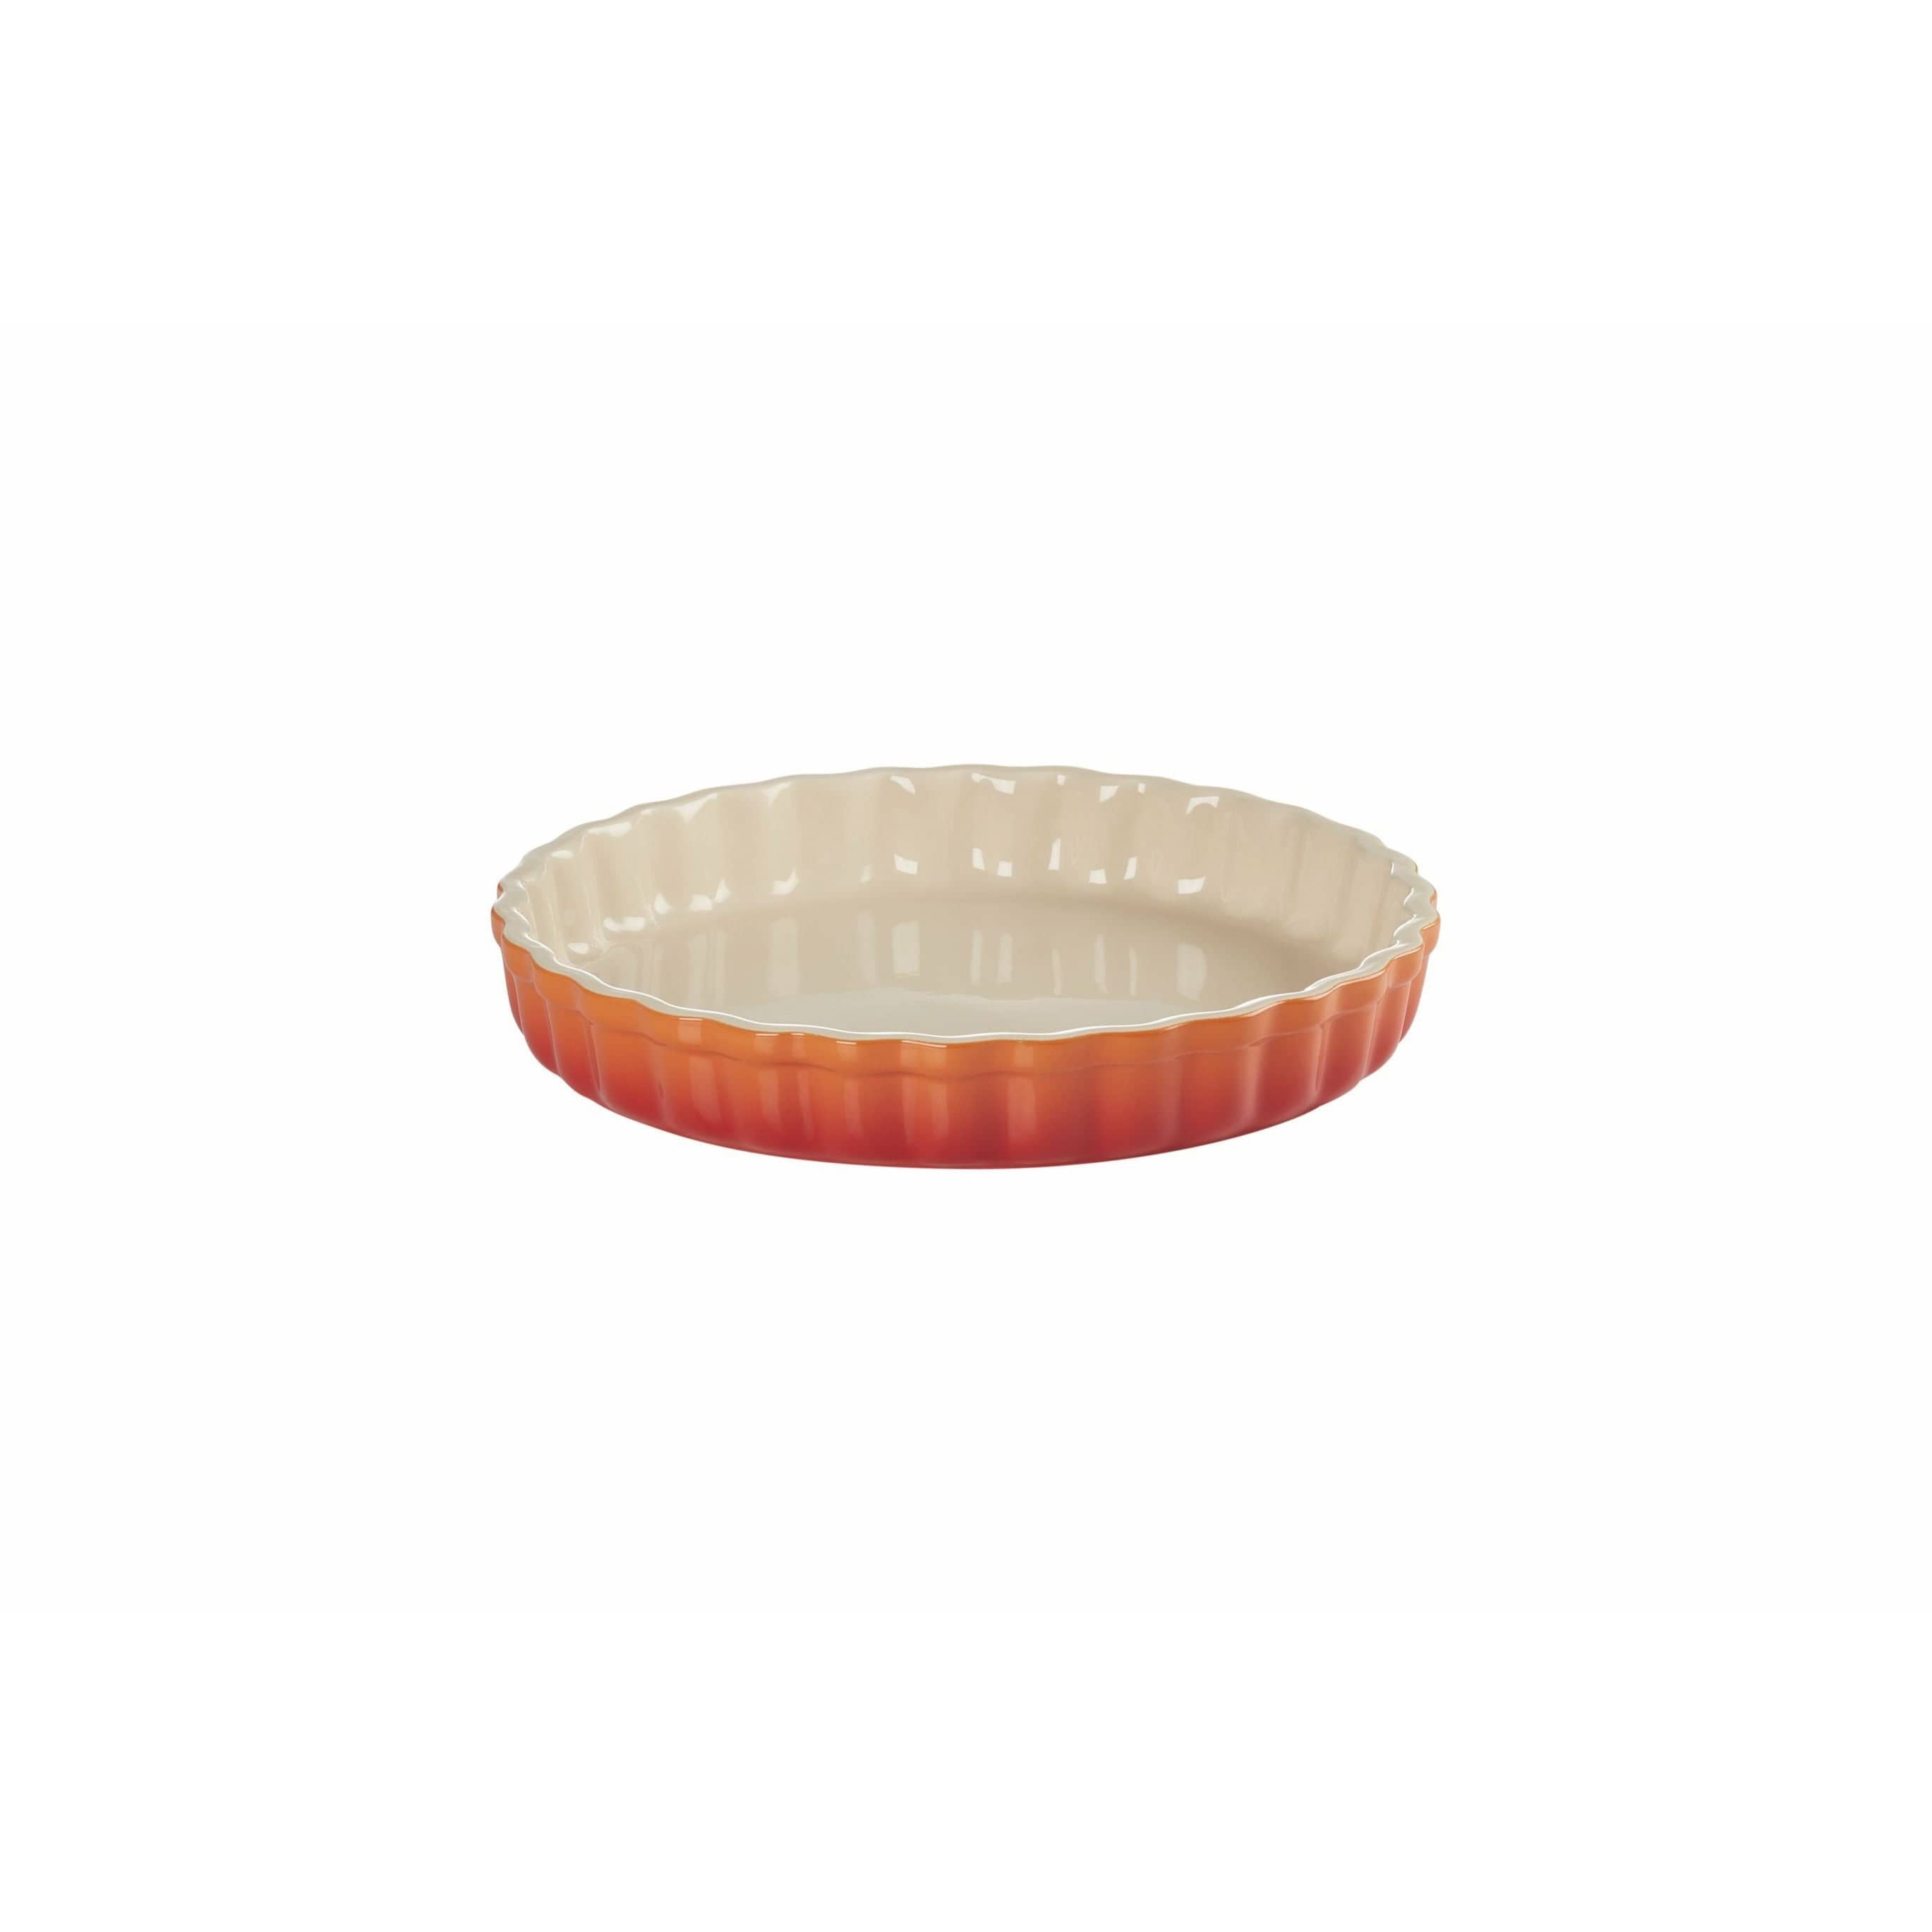 Le Creuset Heritage Cake Tin 24 Cm, Oven Red